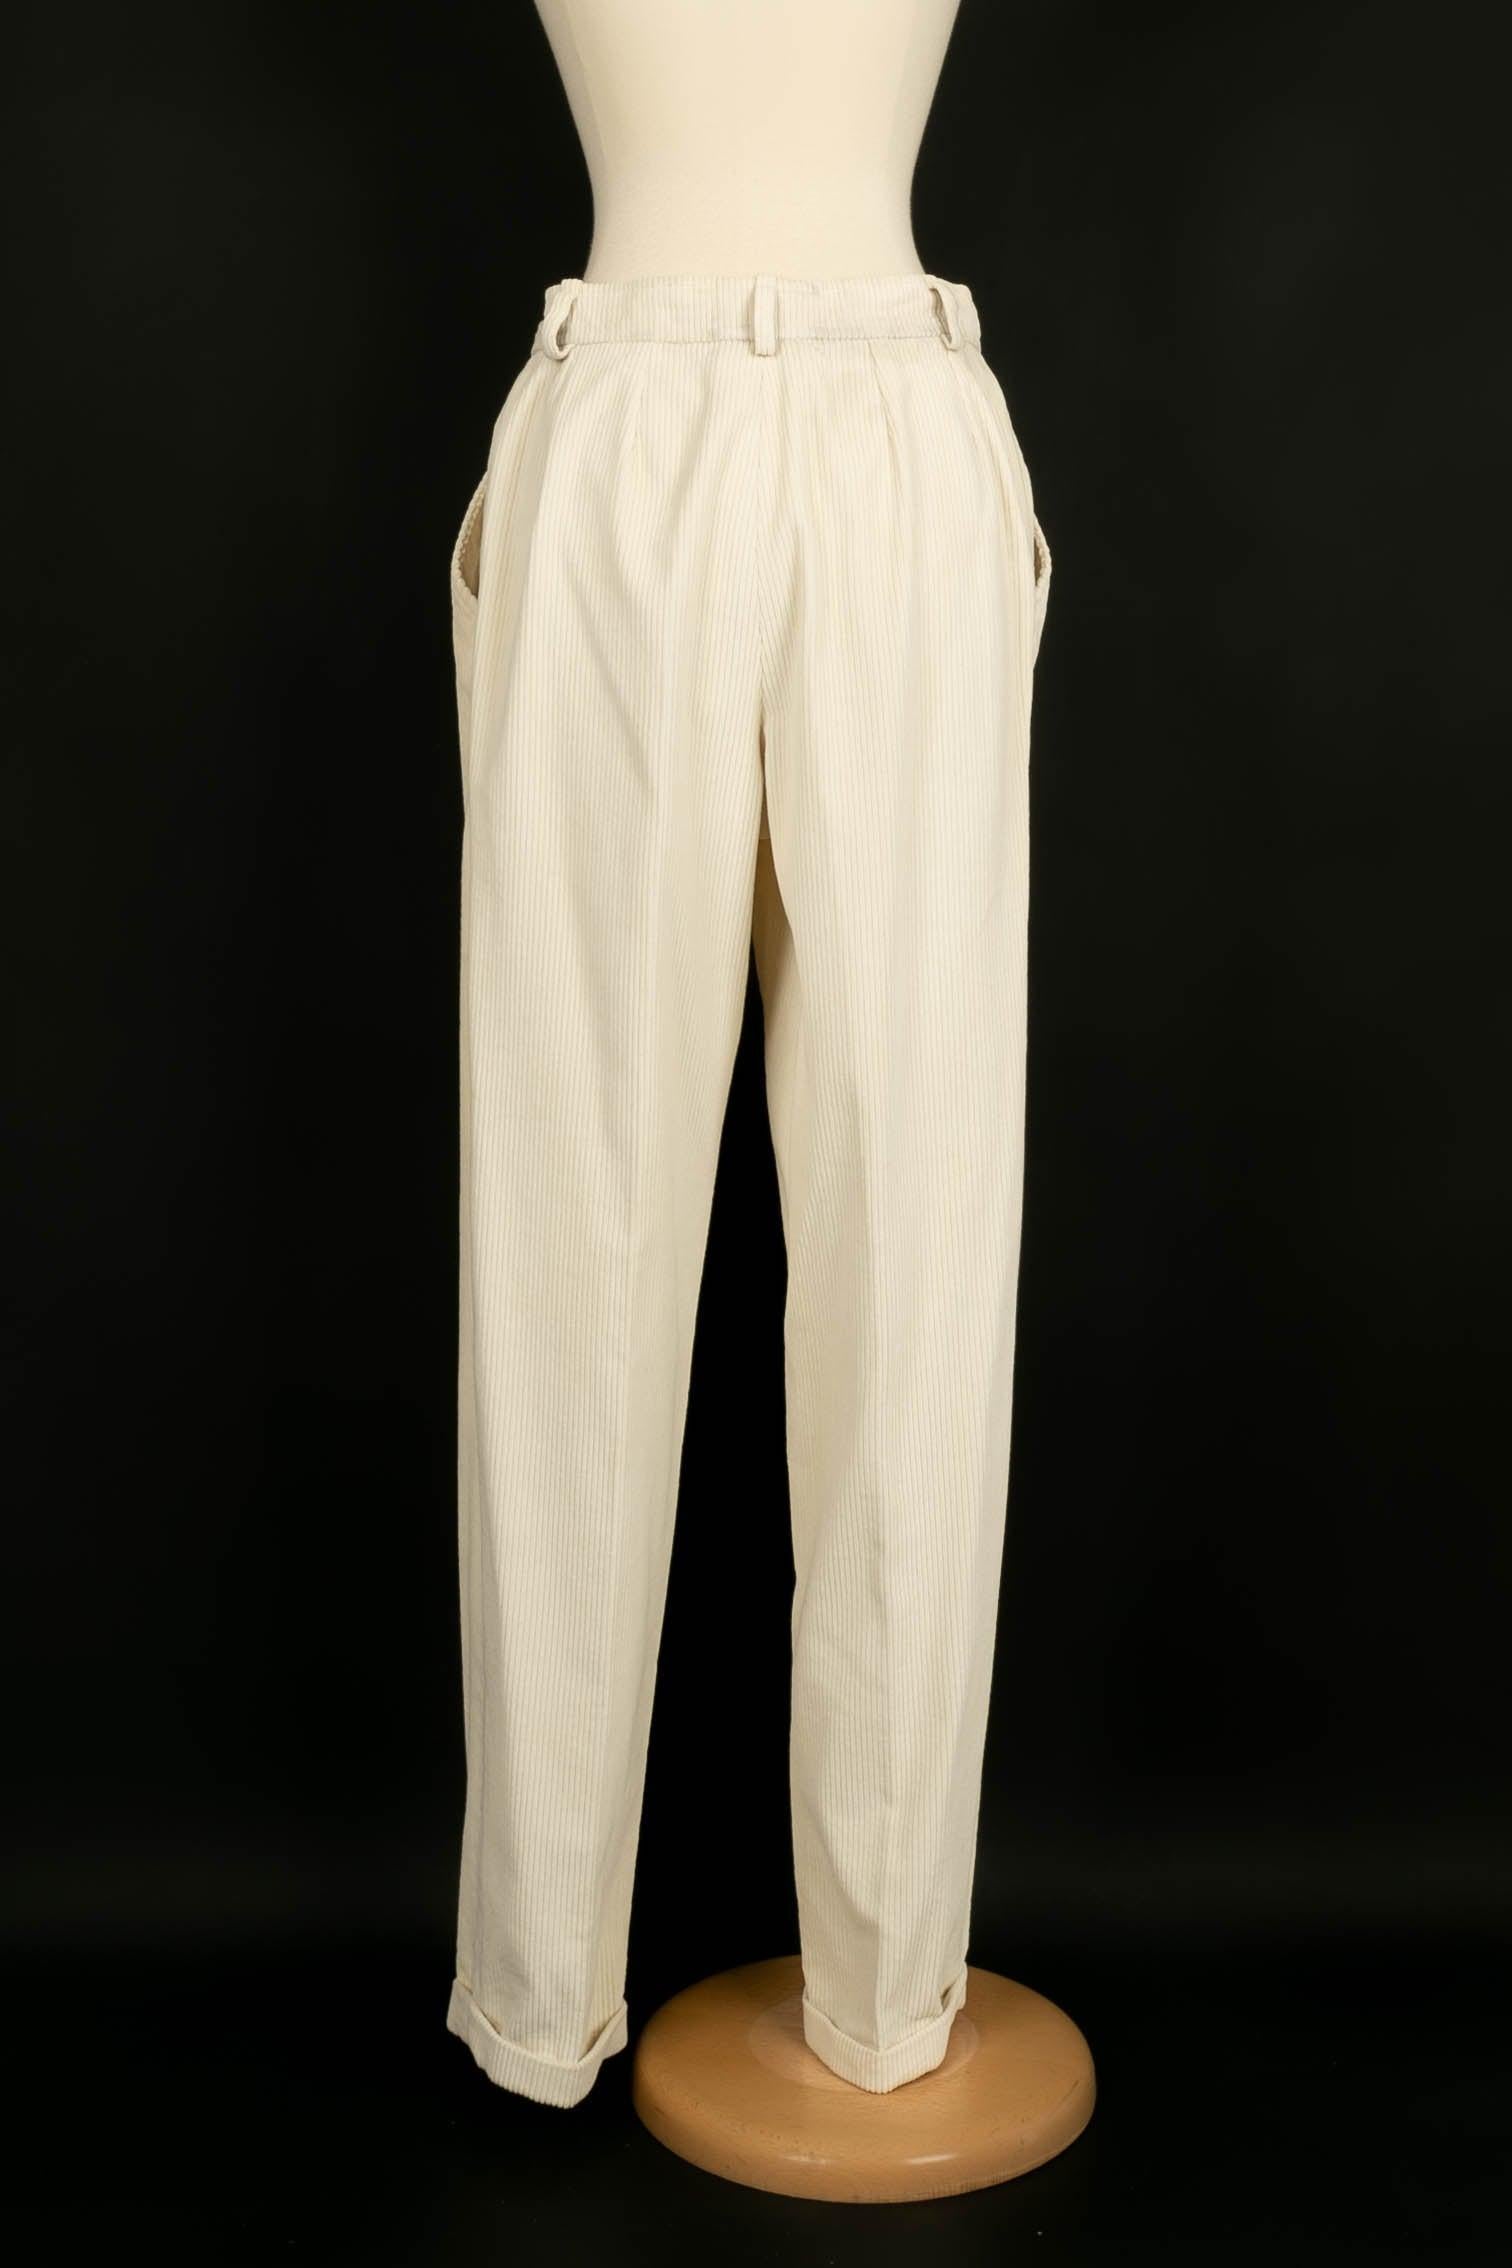 Yves Saint Laurent -(Made in France) Off white corduroy pants. No size indicated, they fit a 36FR

Additional information: 
Dimensions: Waist: 35 cm, Length: 106 cm
Condition: Good condition
Seller Ref number: FJ51